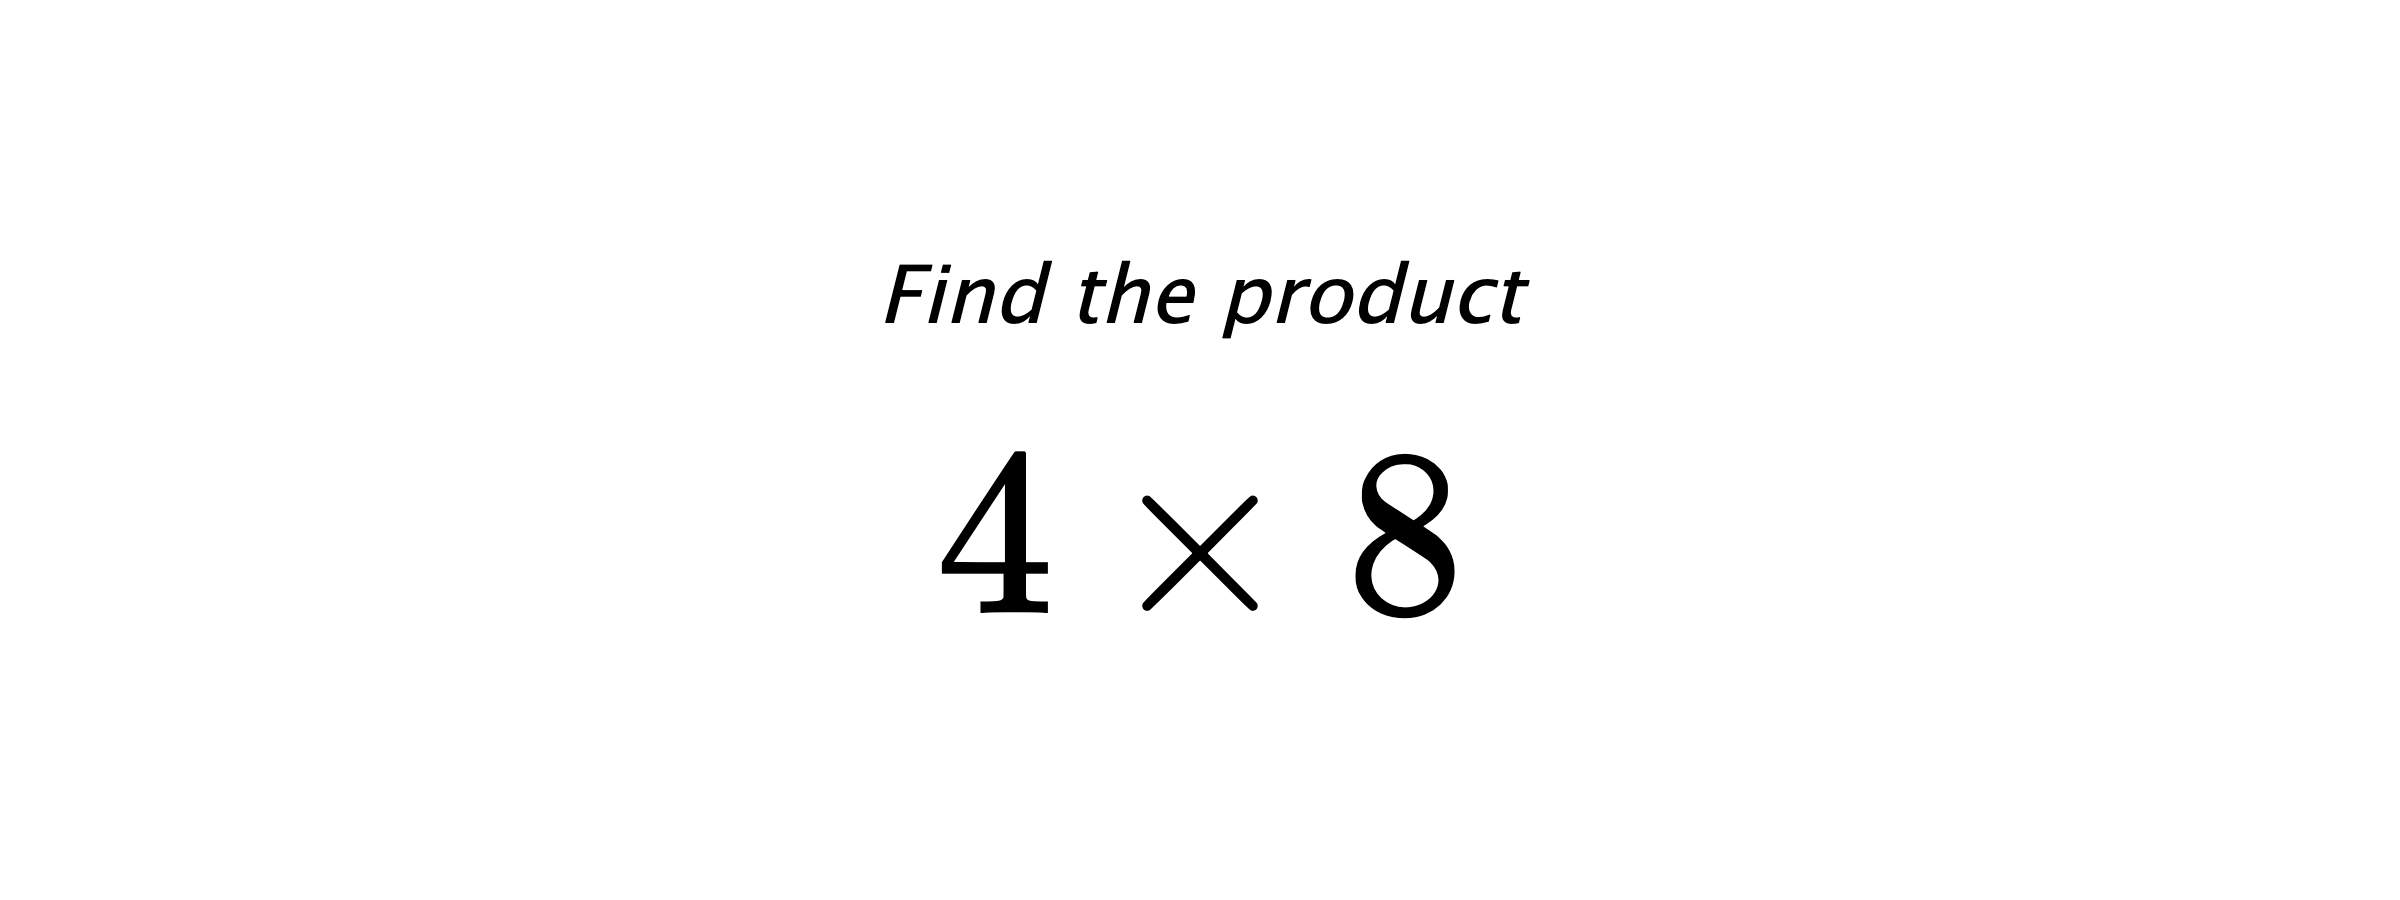 Find the product $ 4 \times 8 $